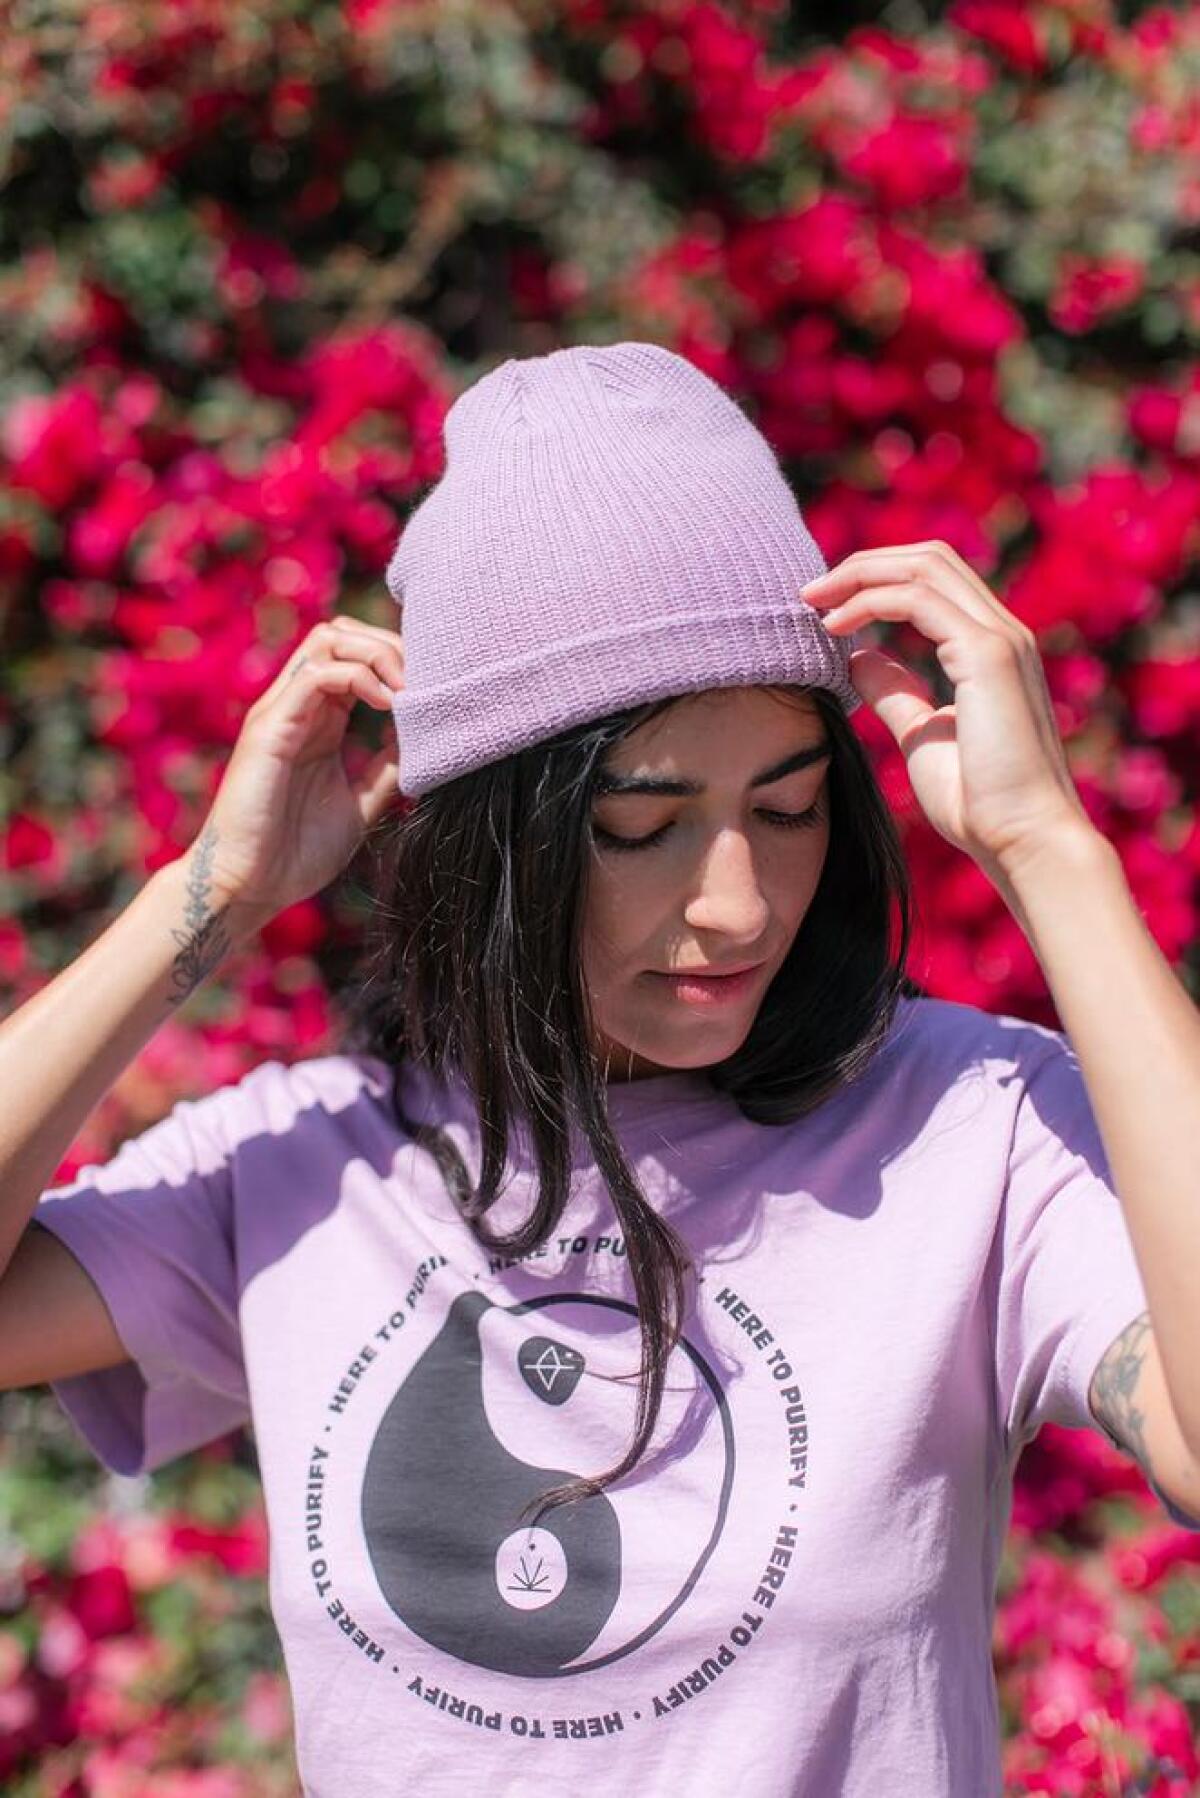 A woman wears a lilac-colored beanie and T-shirt.